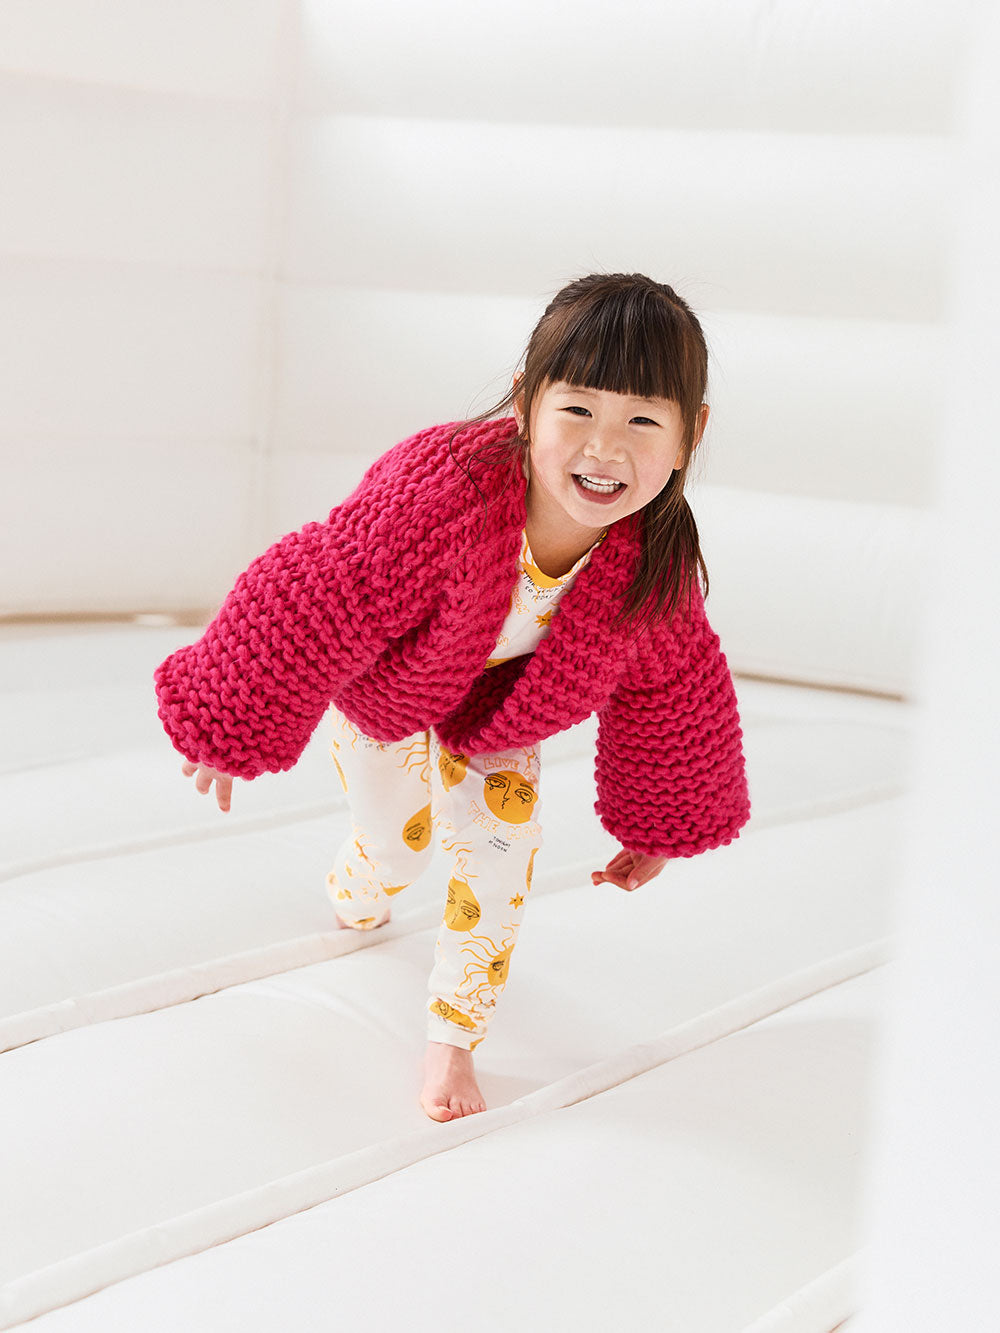 Little girl runs on a white jumping castle smiling at the camera and wearing a bright pink chunky knitted cardigan and leggings